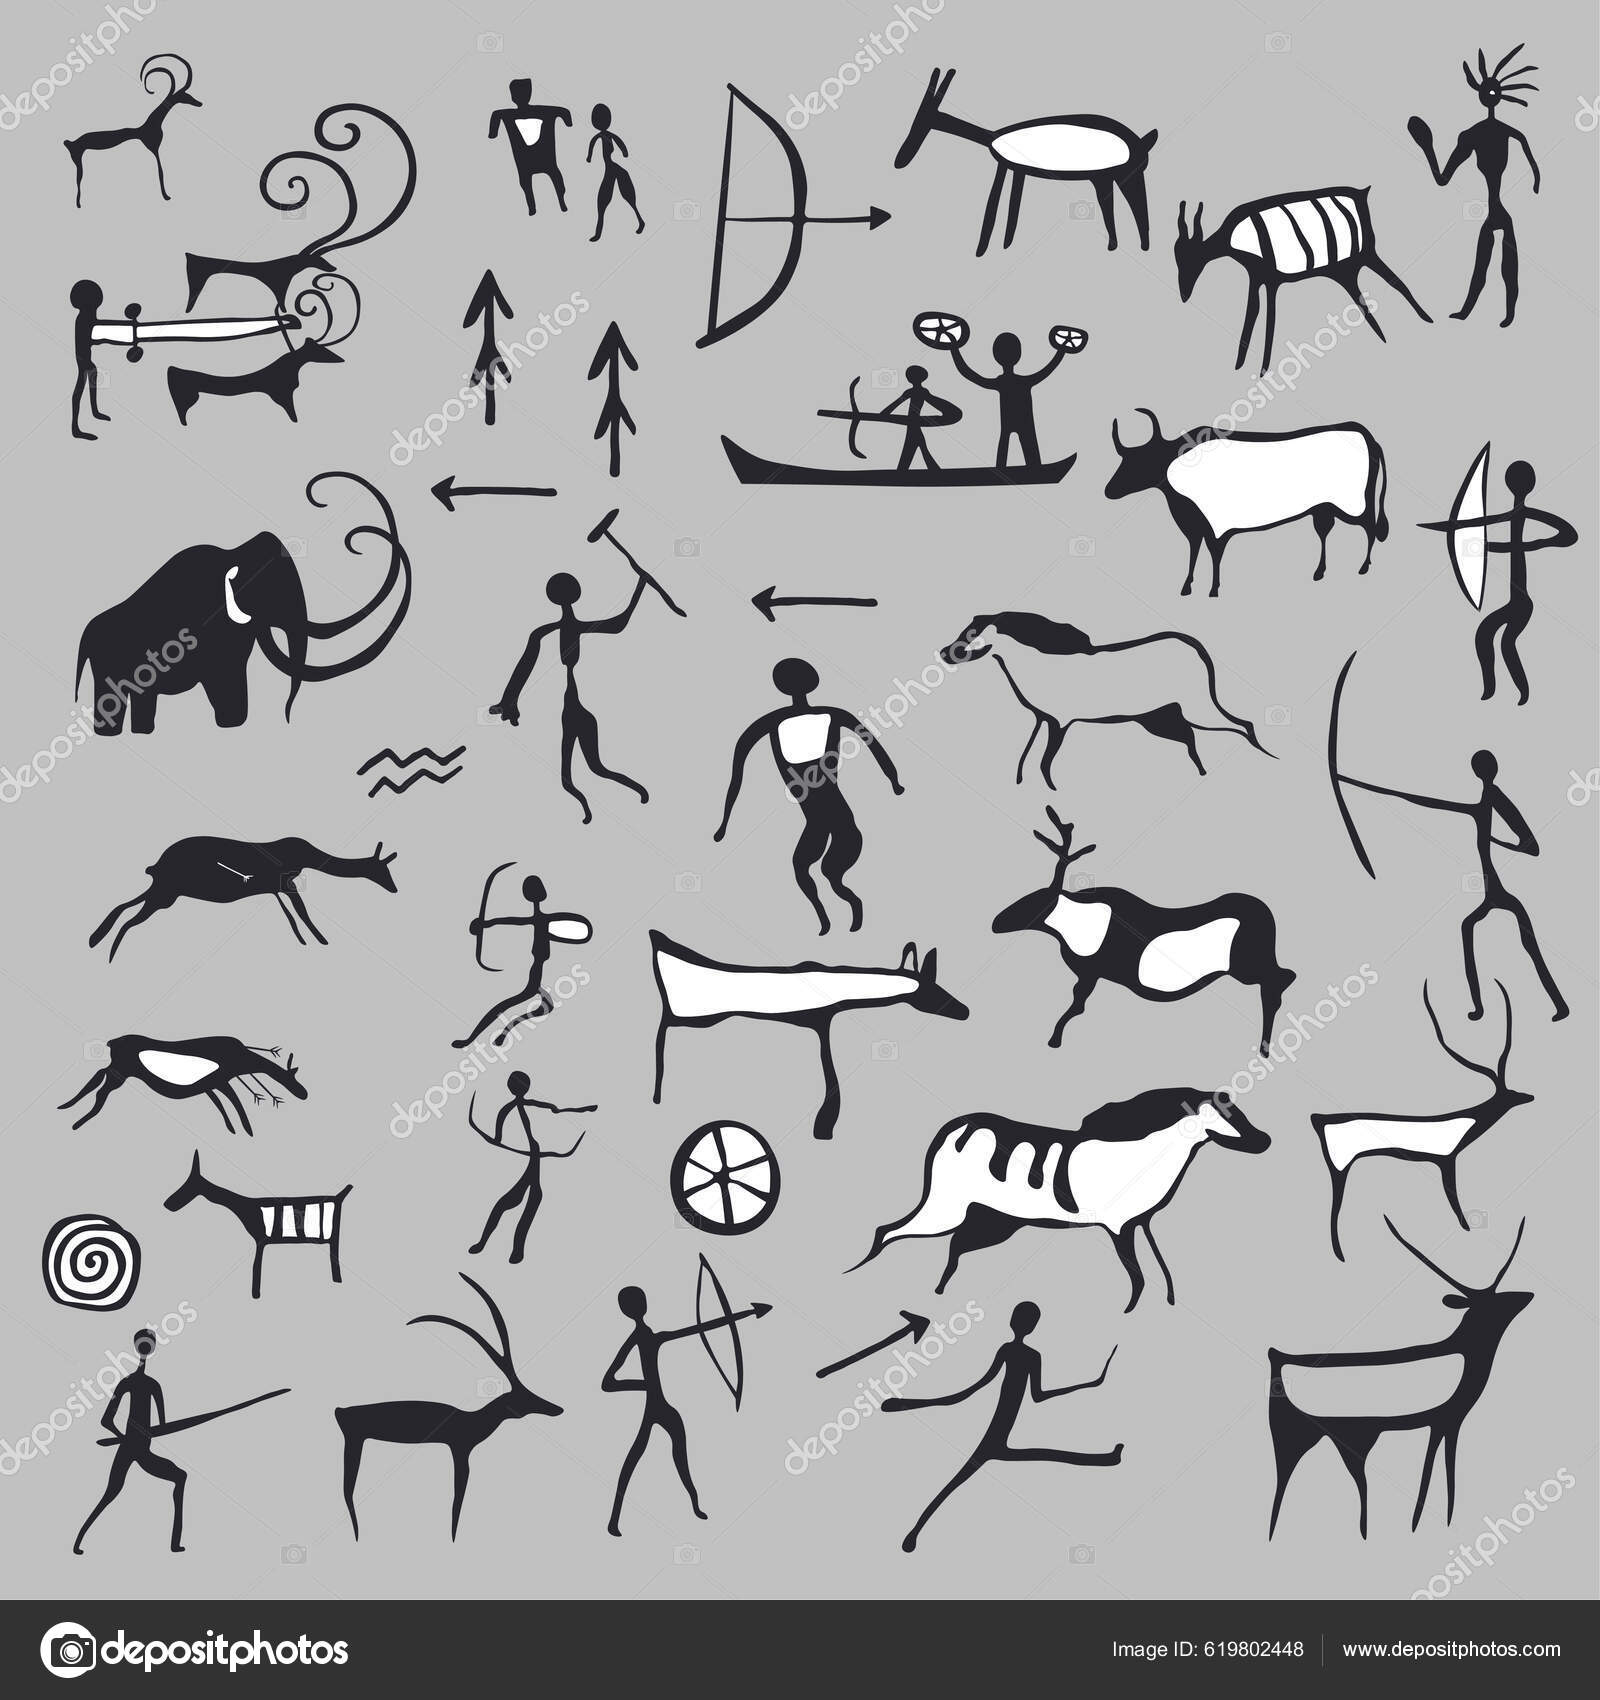 Depositphotos 619802448 Stock Illustration Cave Drawings Symbols Silhouettes People 